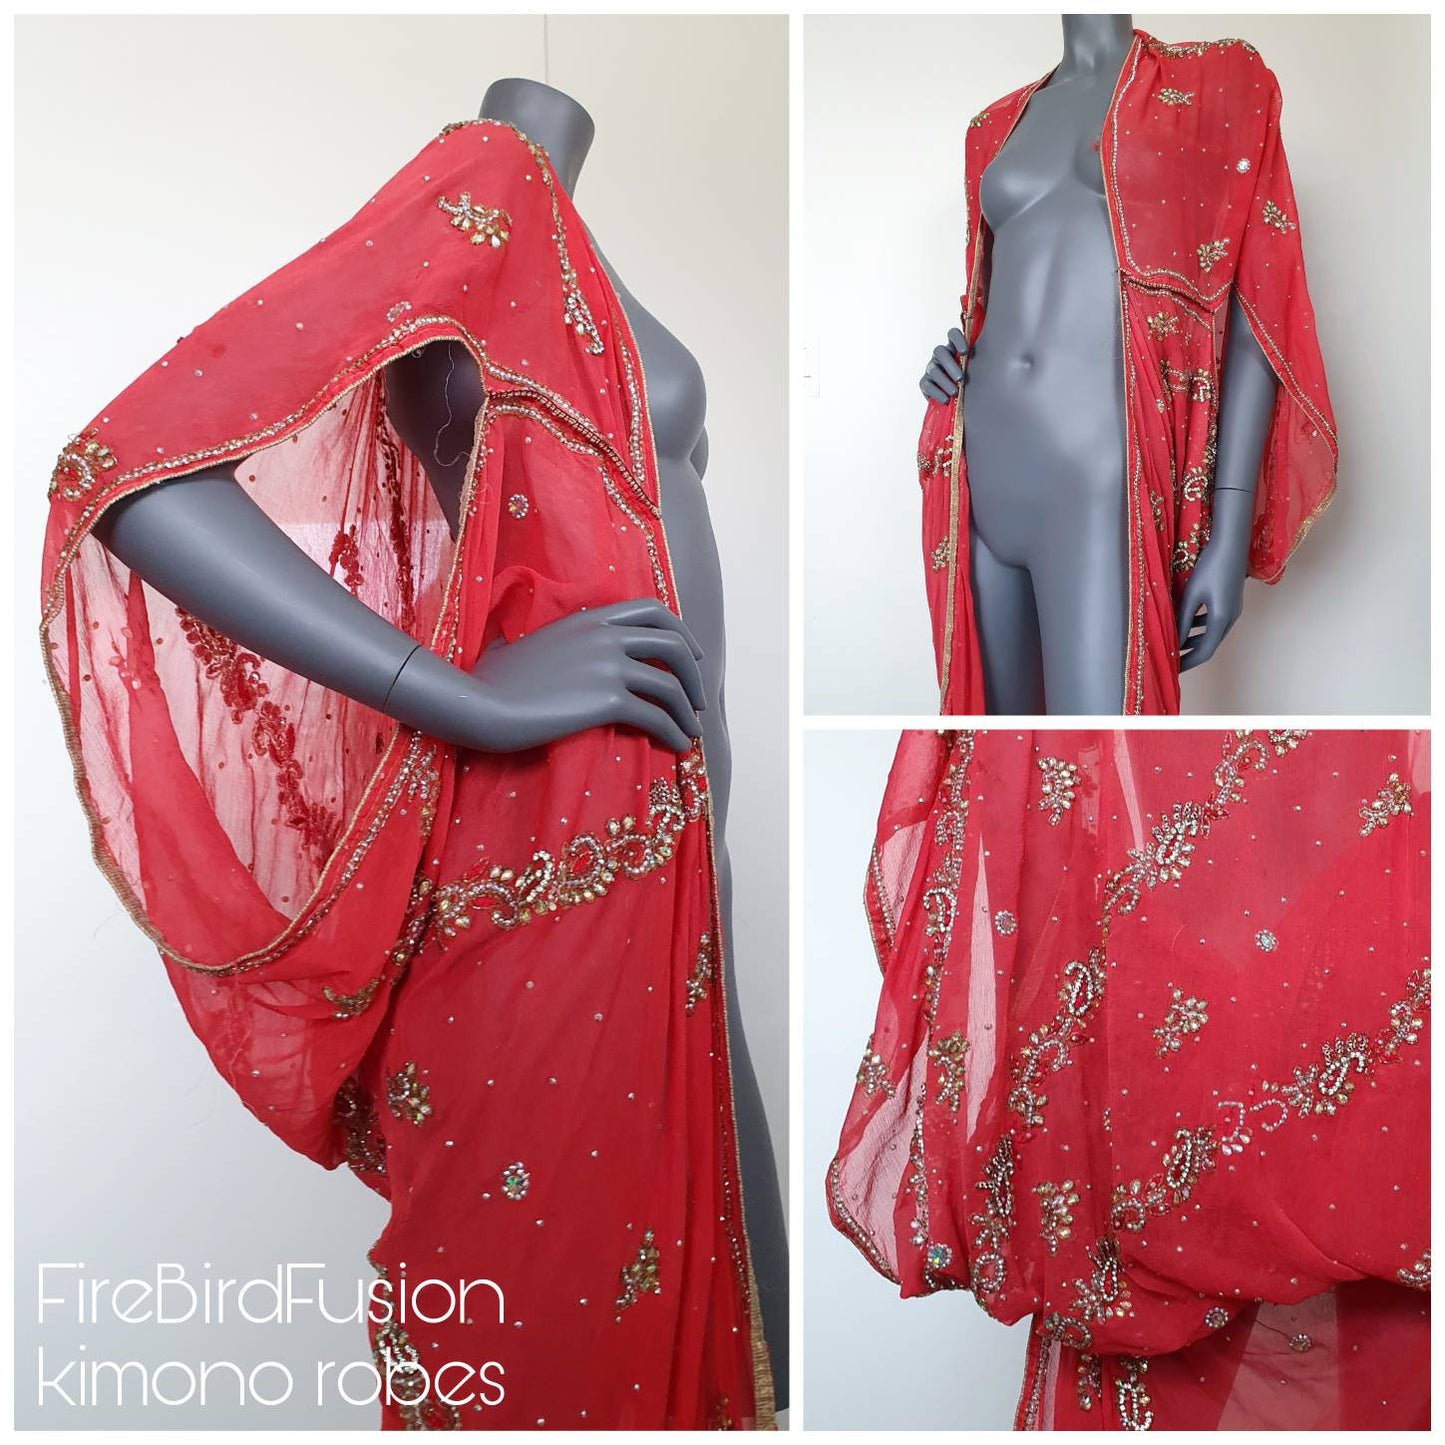 Draped kimono in warm punch with elaborated hand embroidery with irredecent crystals (M)